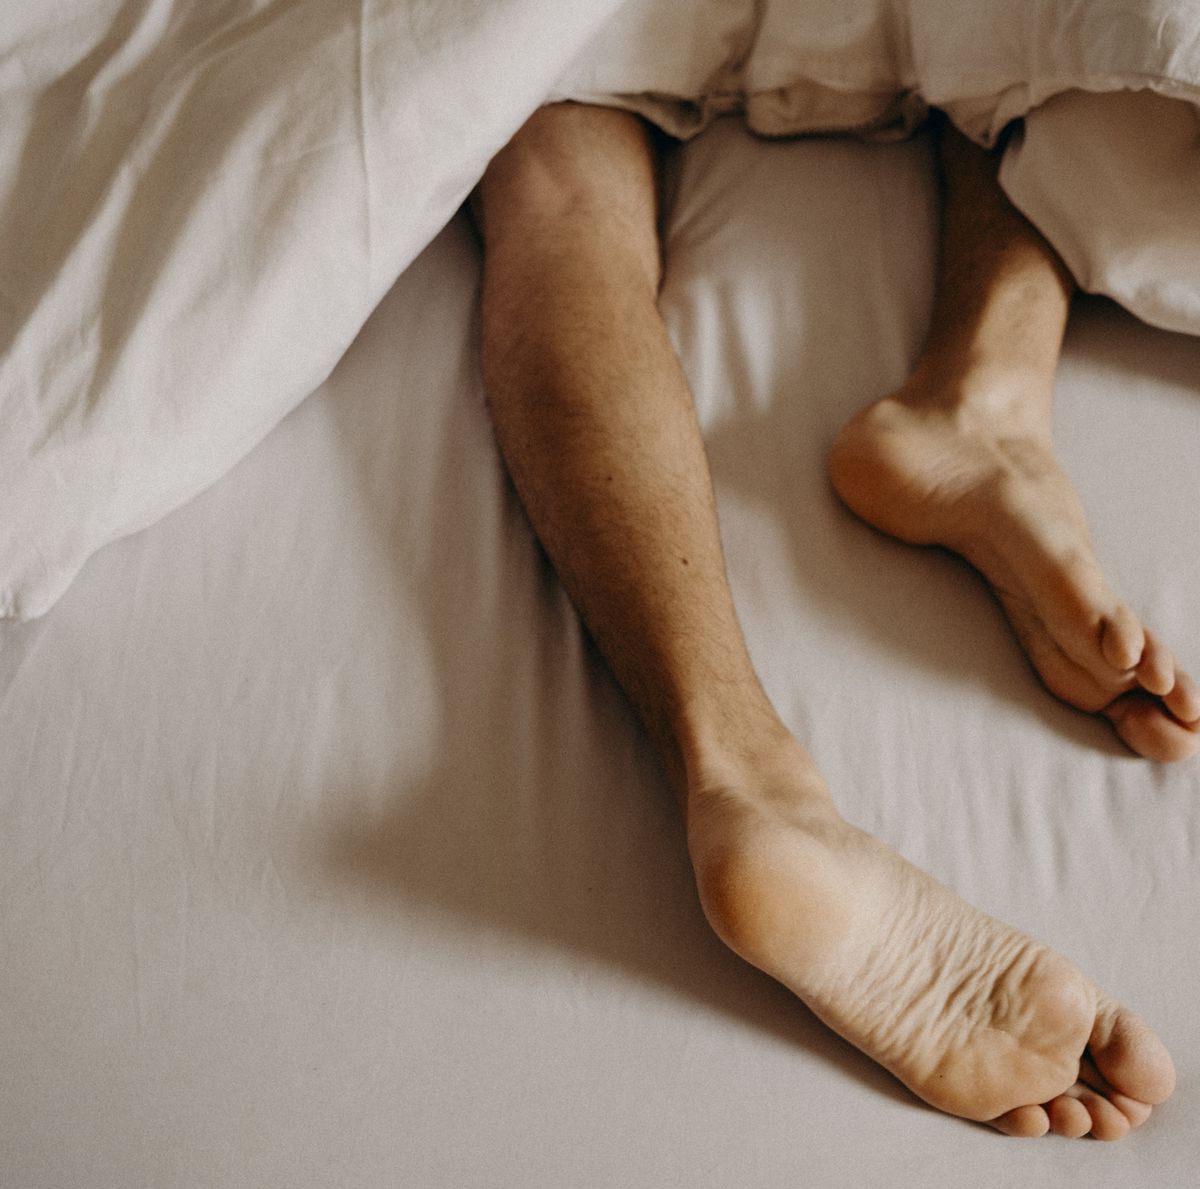 Managing Restless Legs Syndrome With Exercise: Tips for Safe and